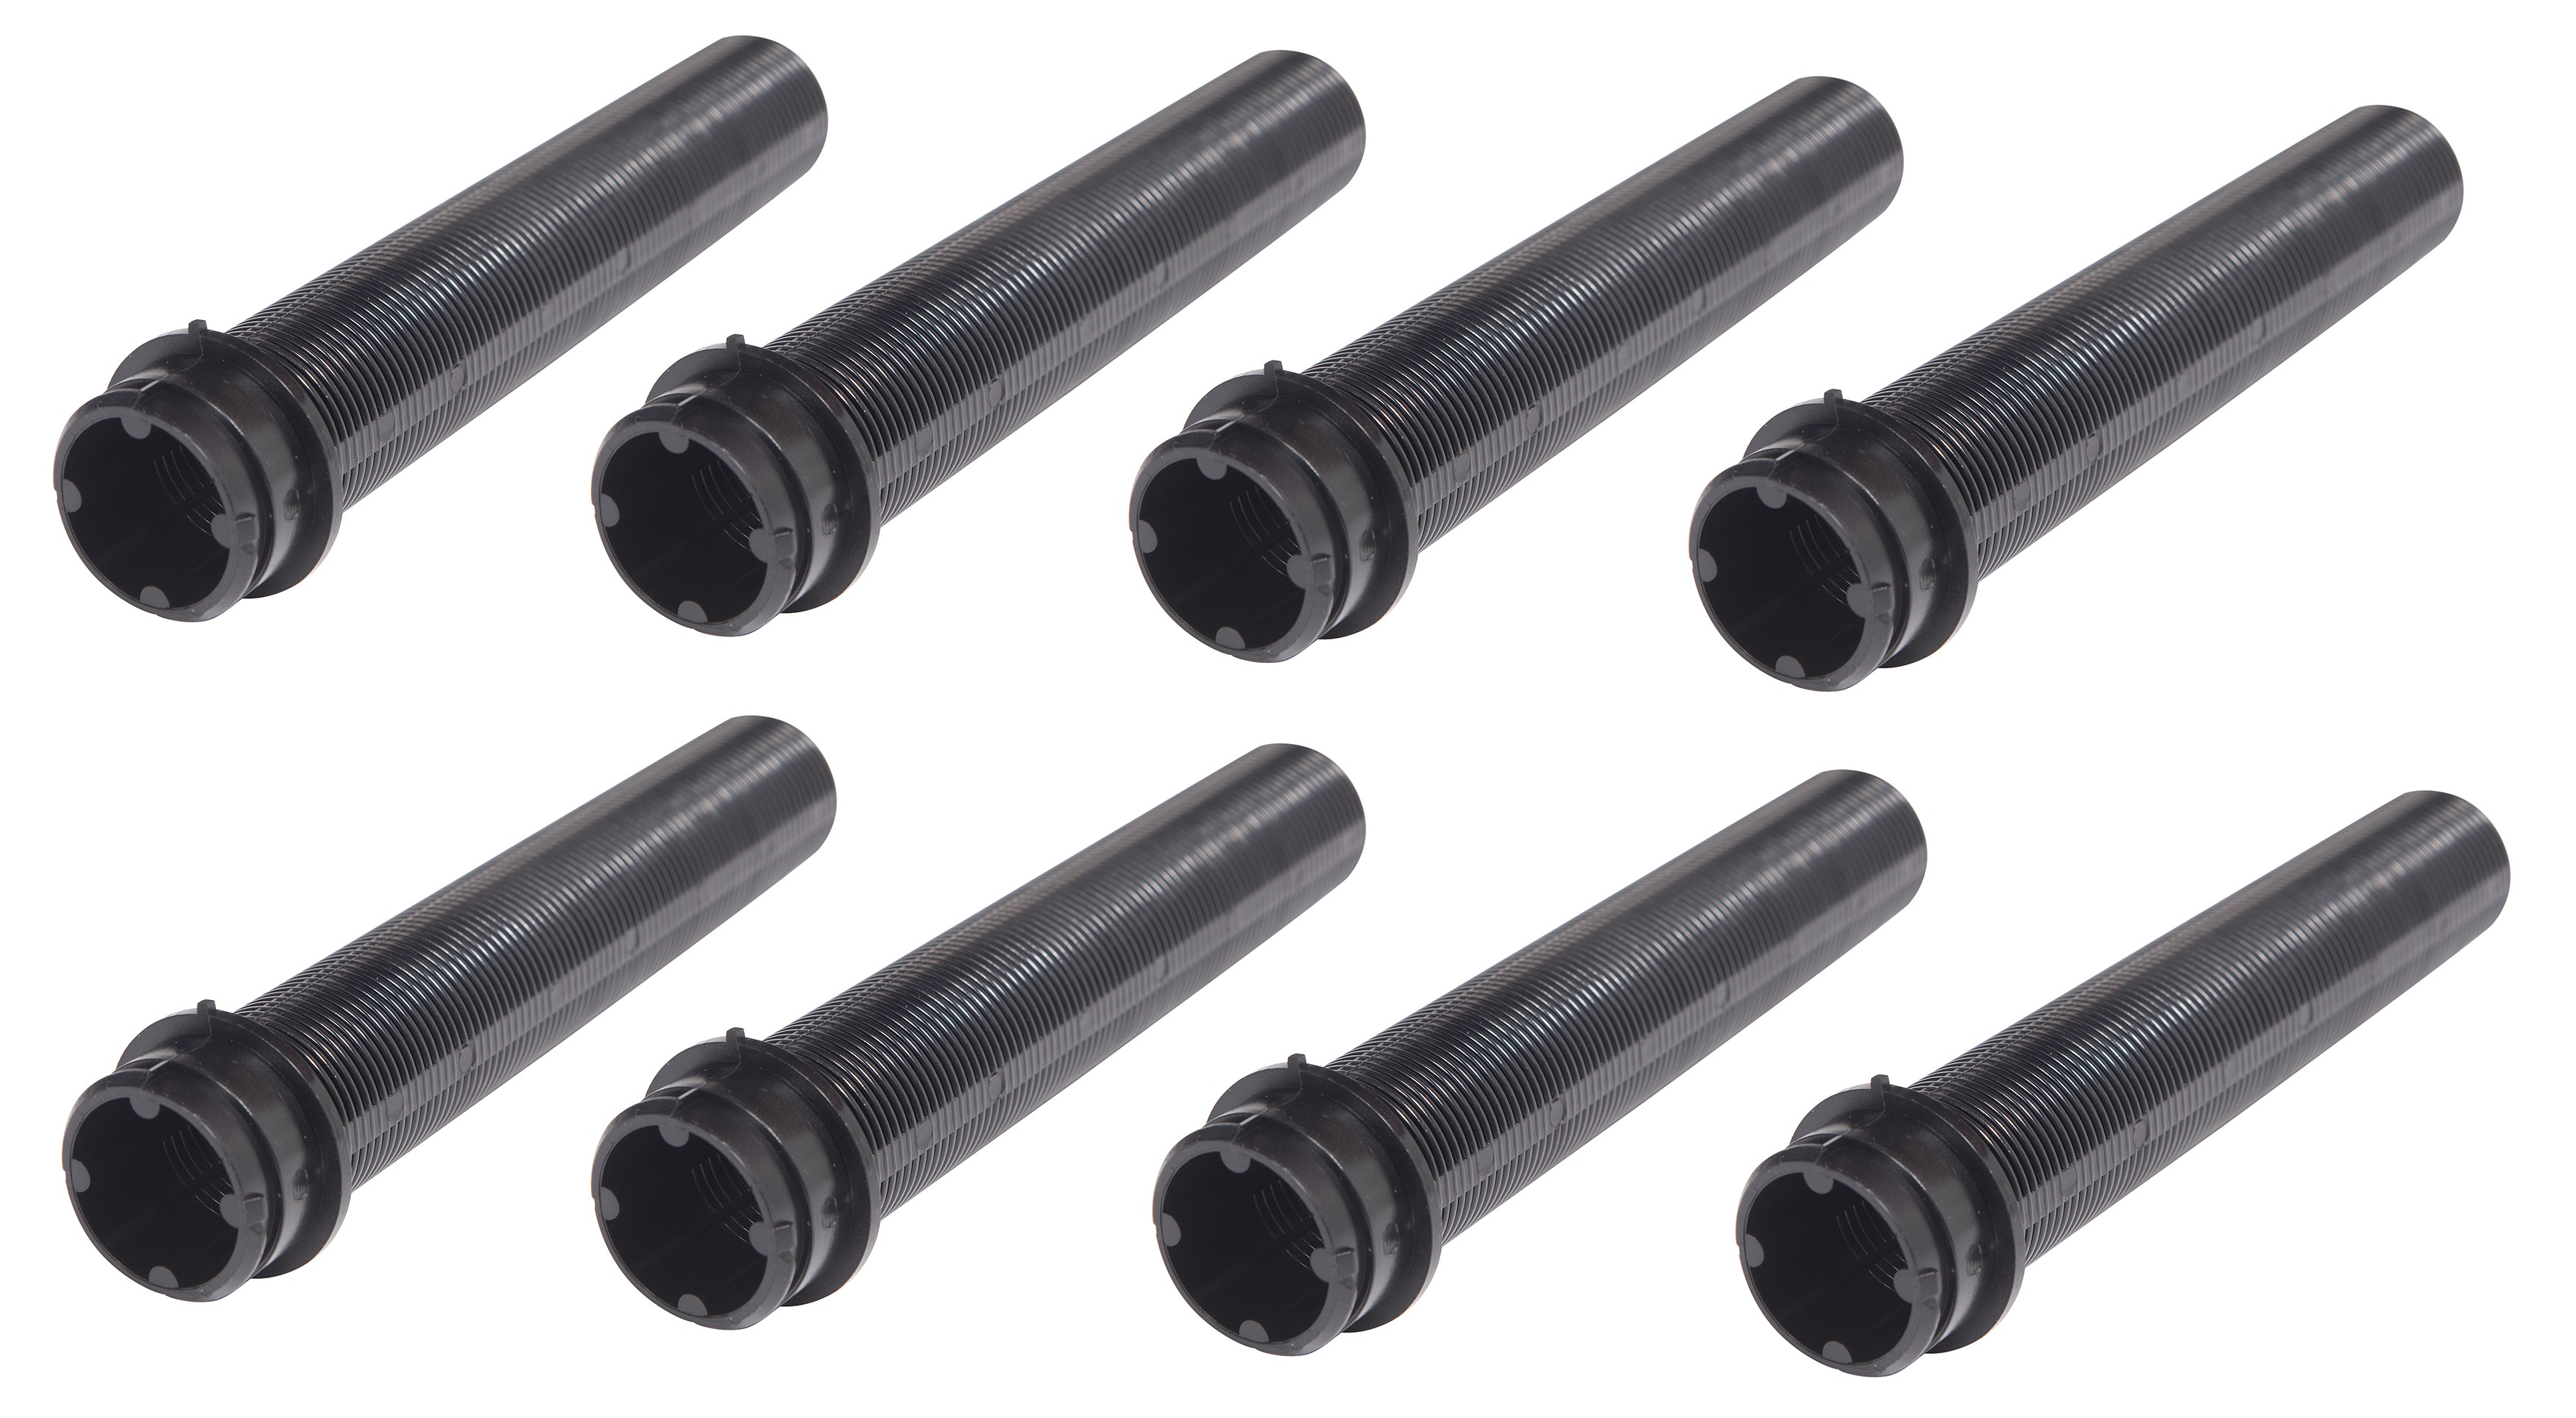 Replacement Lateral for Sunsolar and Pooline Sand Filter Model 11600 (pack of 8)